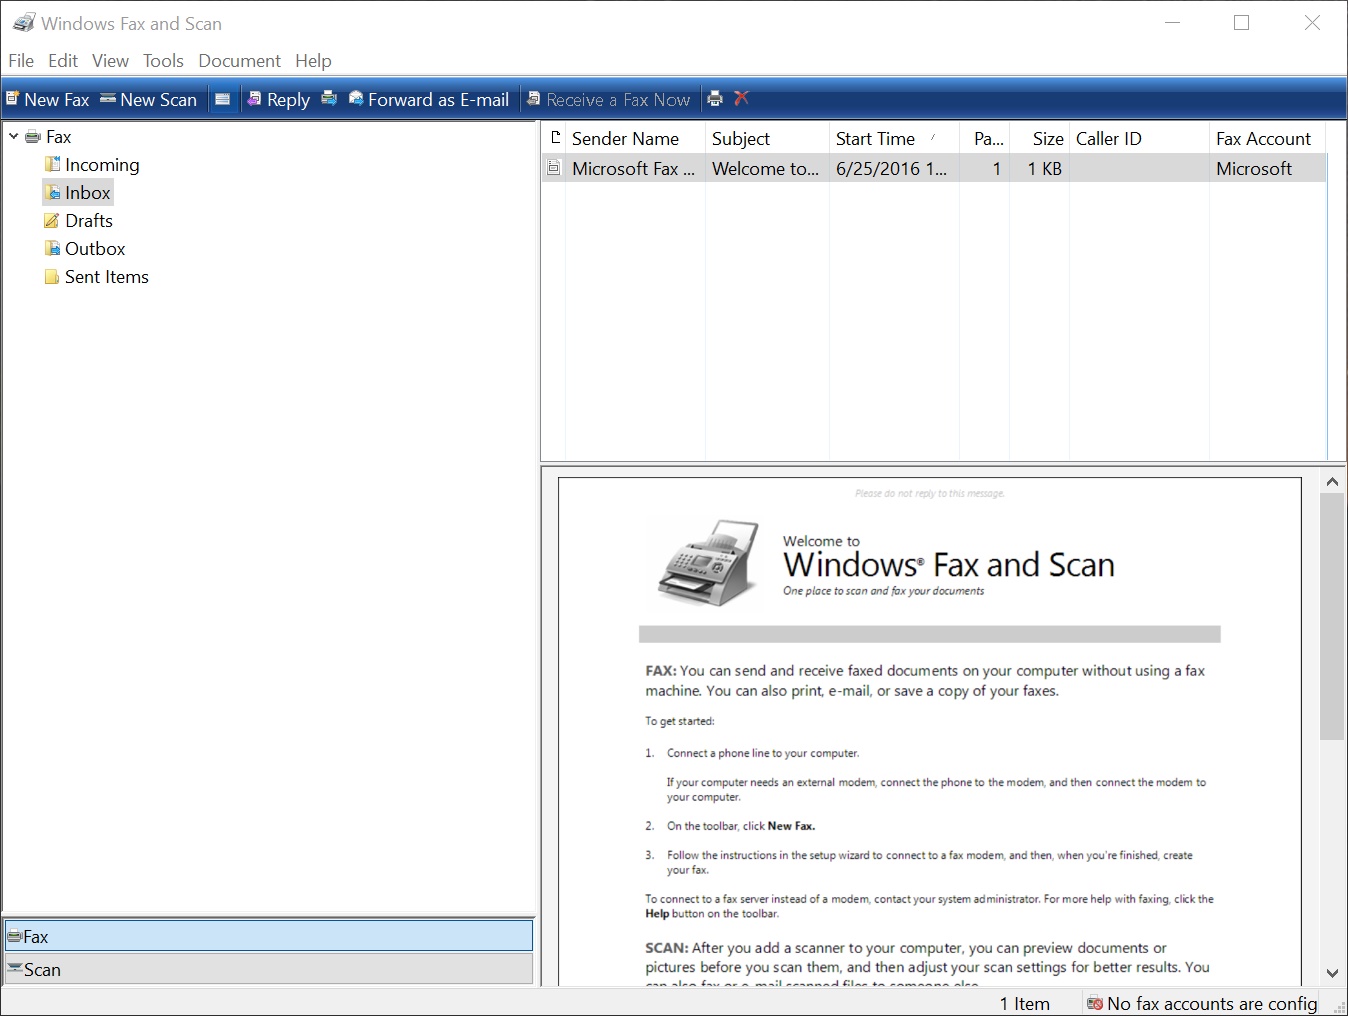 Windows Fax and Scan on Windows 10